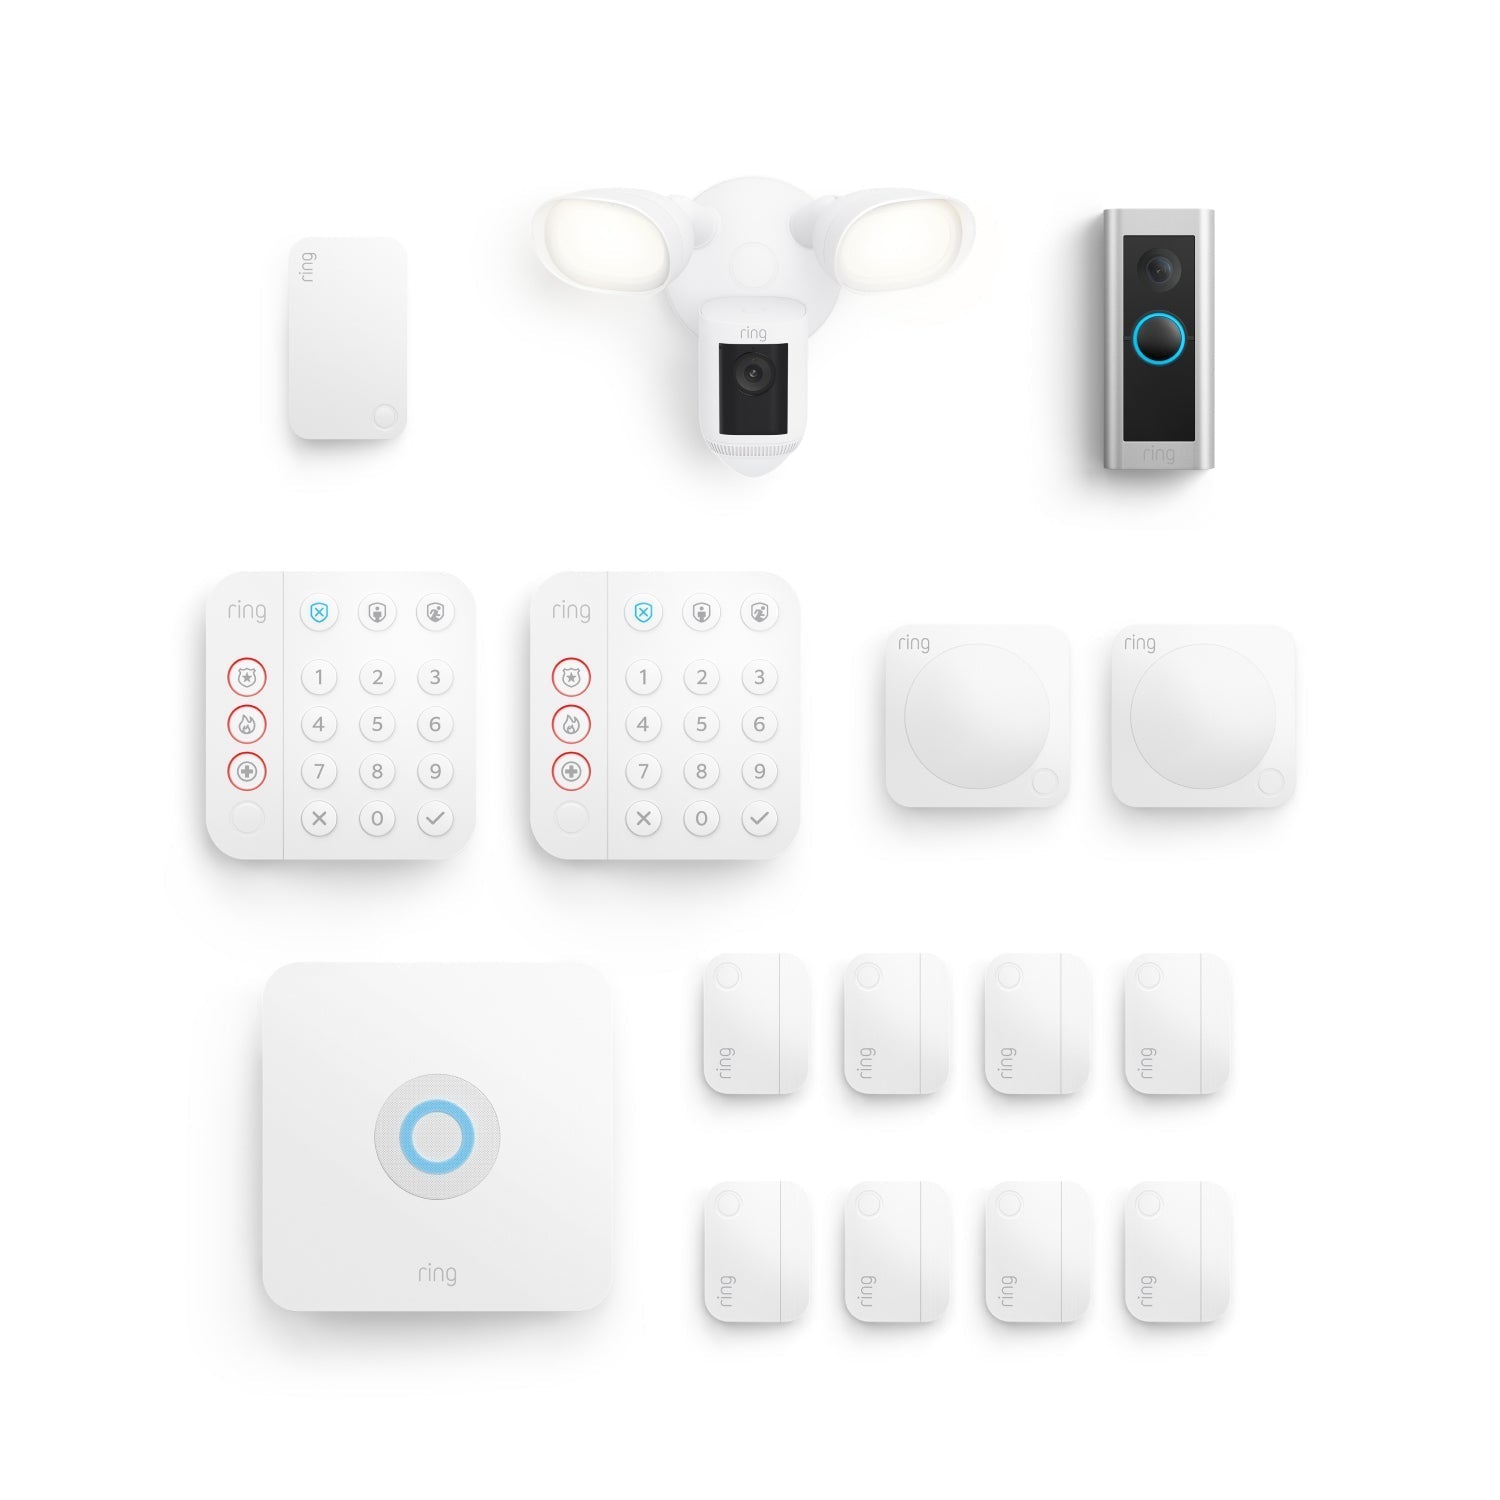 Whole Home Deluxe Kit (Wired Doorbell Pro (Video Doorbell Pro 2) + Floodlight Cam Wired Pro + Alarm Security Kit, 14-Piece) - White